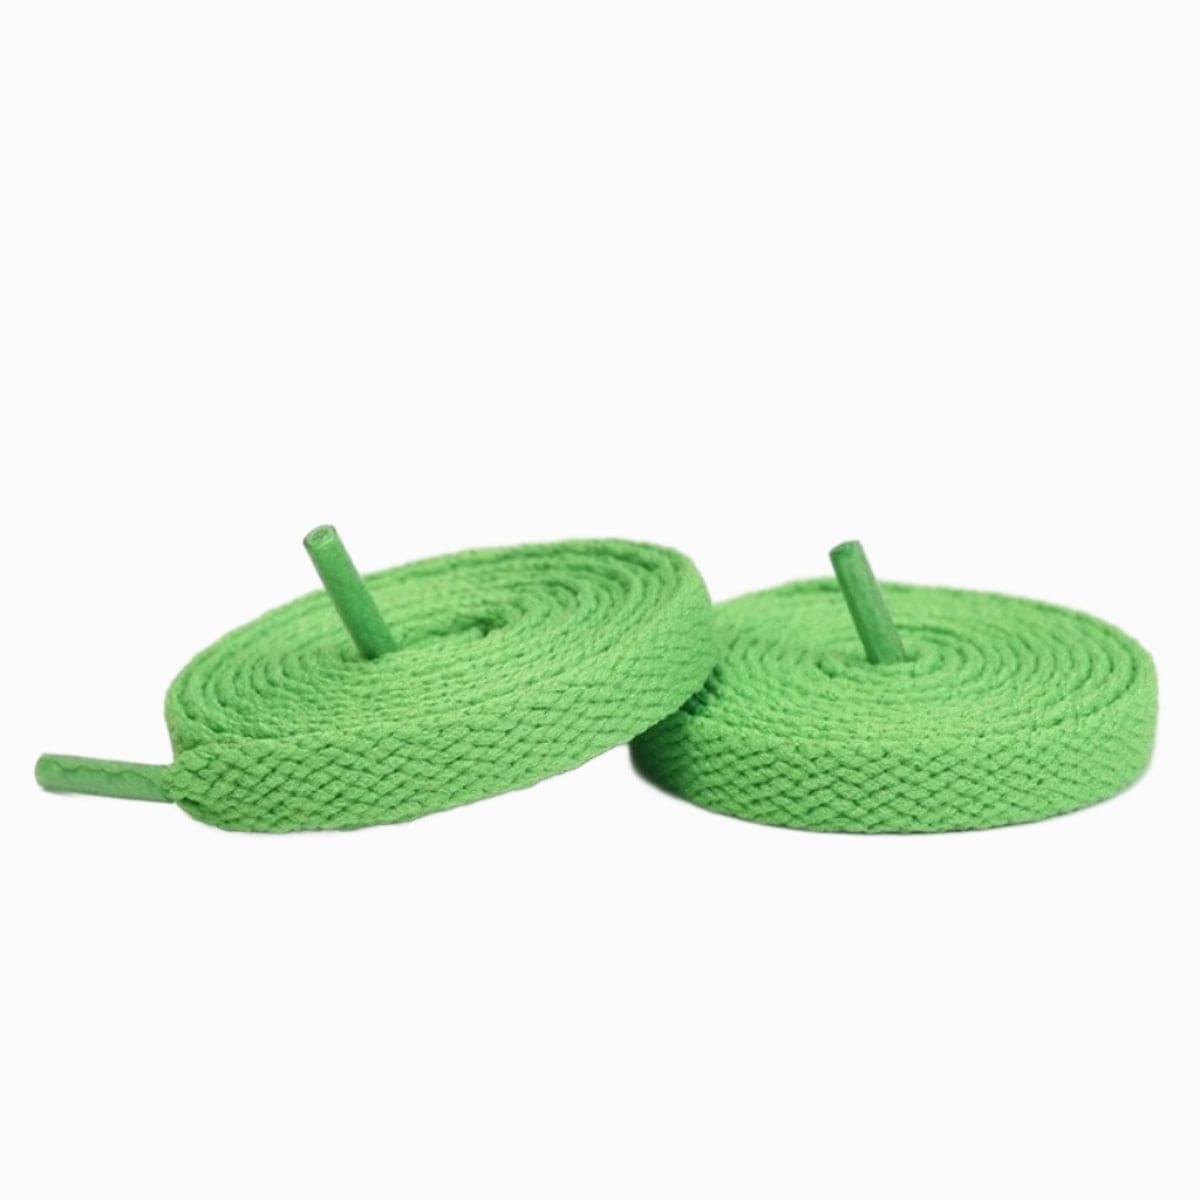 Bright Green Replacement Shoe Laces for Adidas Handball Spezial Sneakers by Kicks Shoelaces